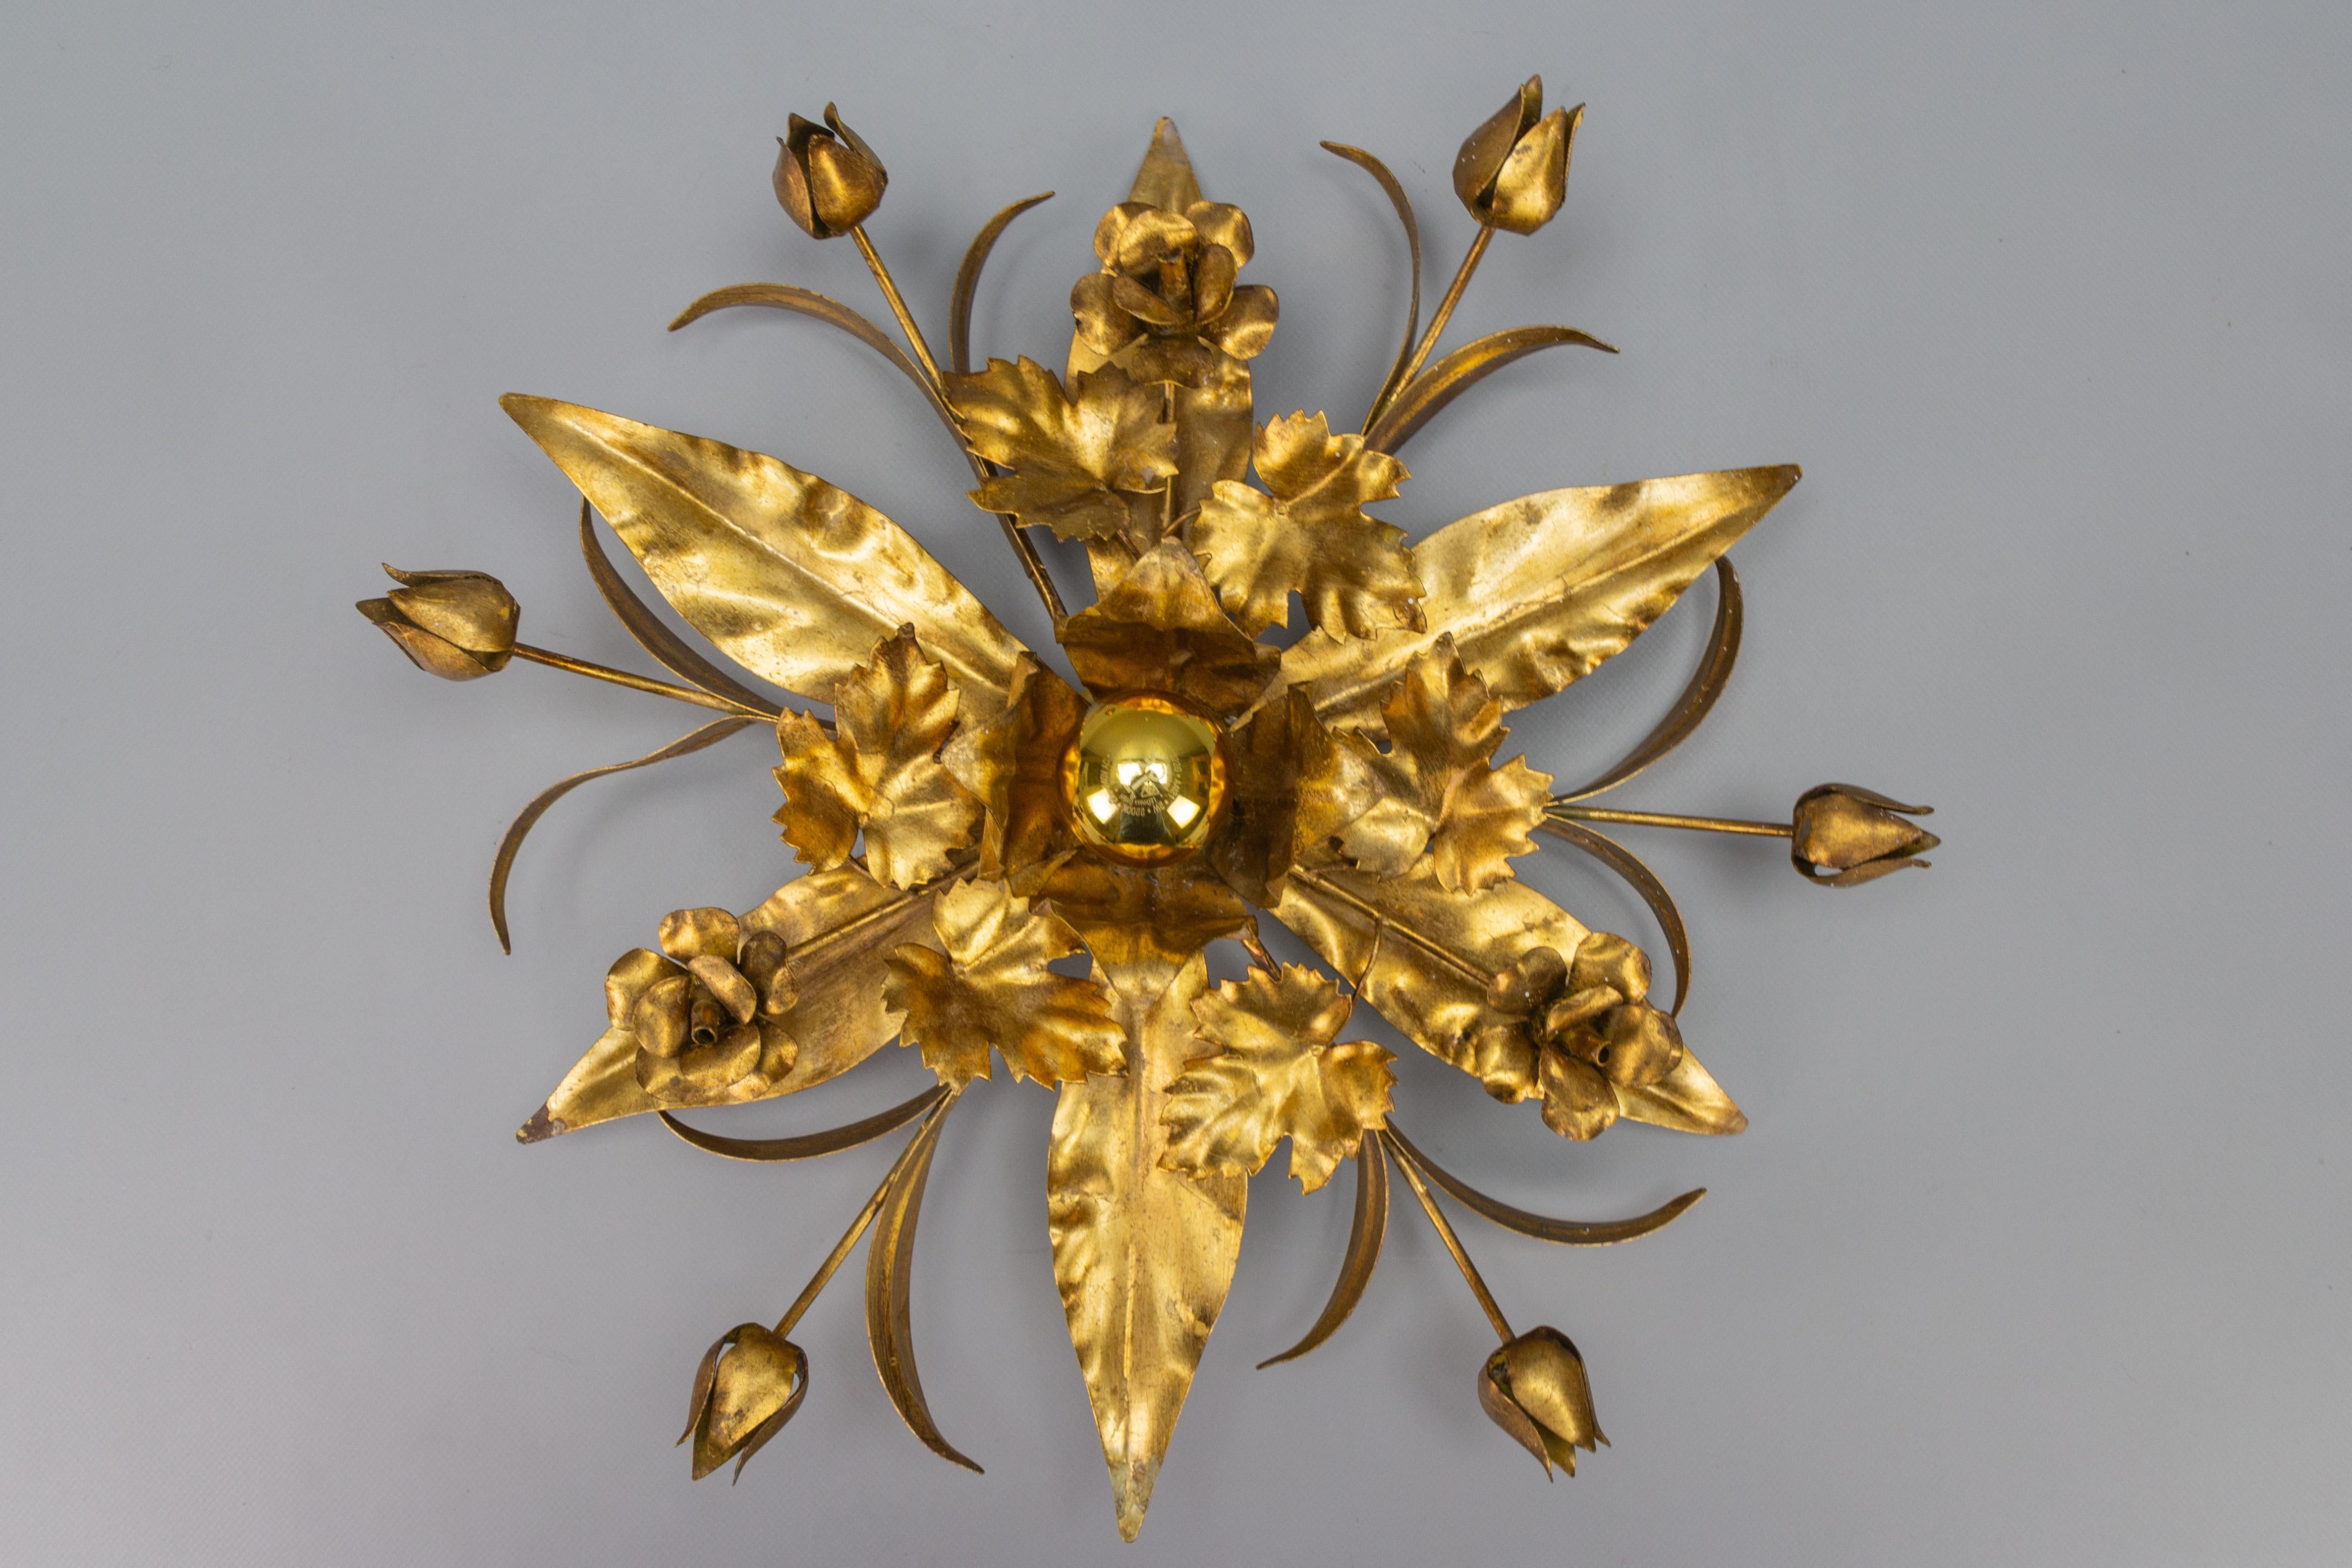 Gilt metal flower-shaped flush mount or wall lamp by Hans Kögl, the 1970s.
Adorable Hollywood Regency style gilt metal flower-shaped flush mount or wall light, adorned with beautifully shaped leaves, flowers, and buds.
One new socket for an E27